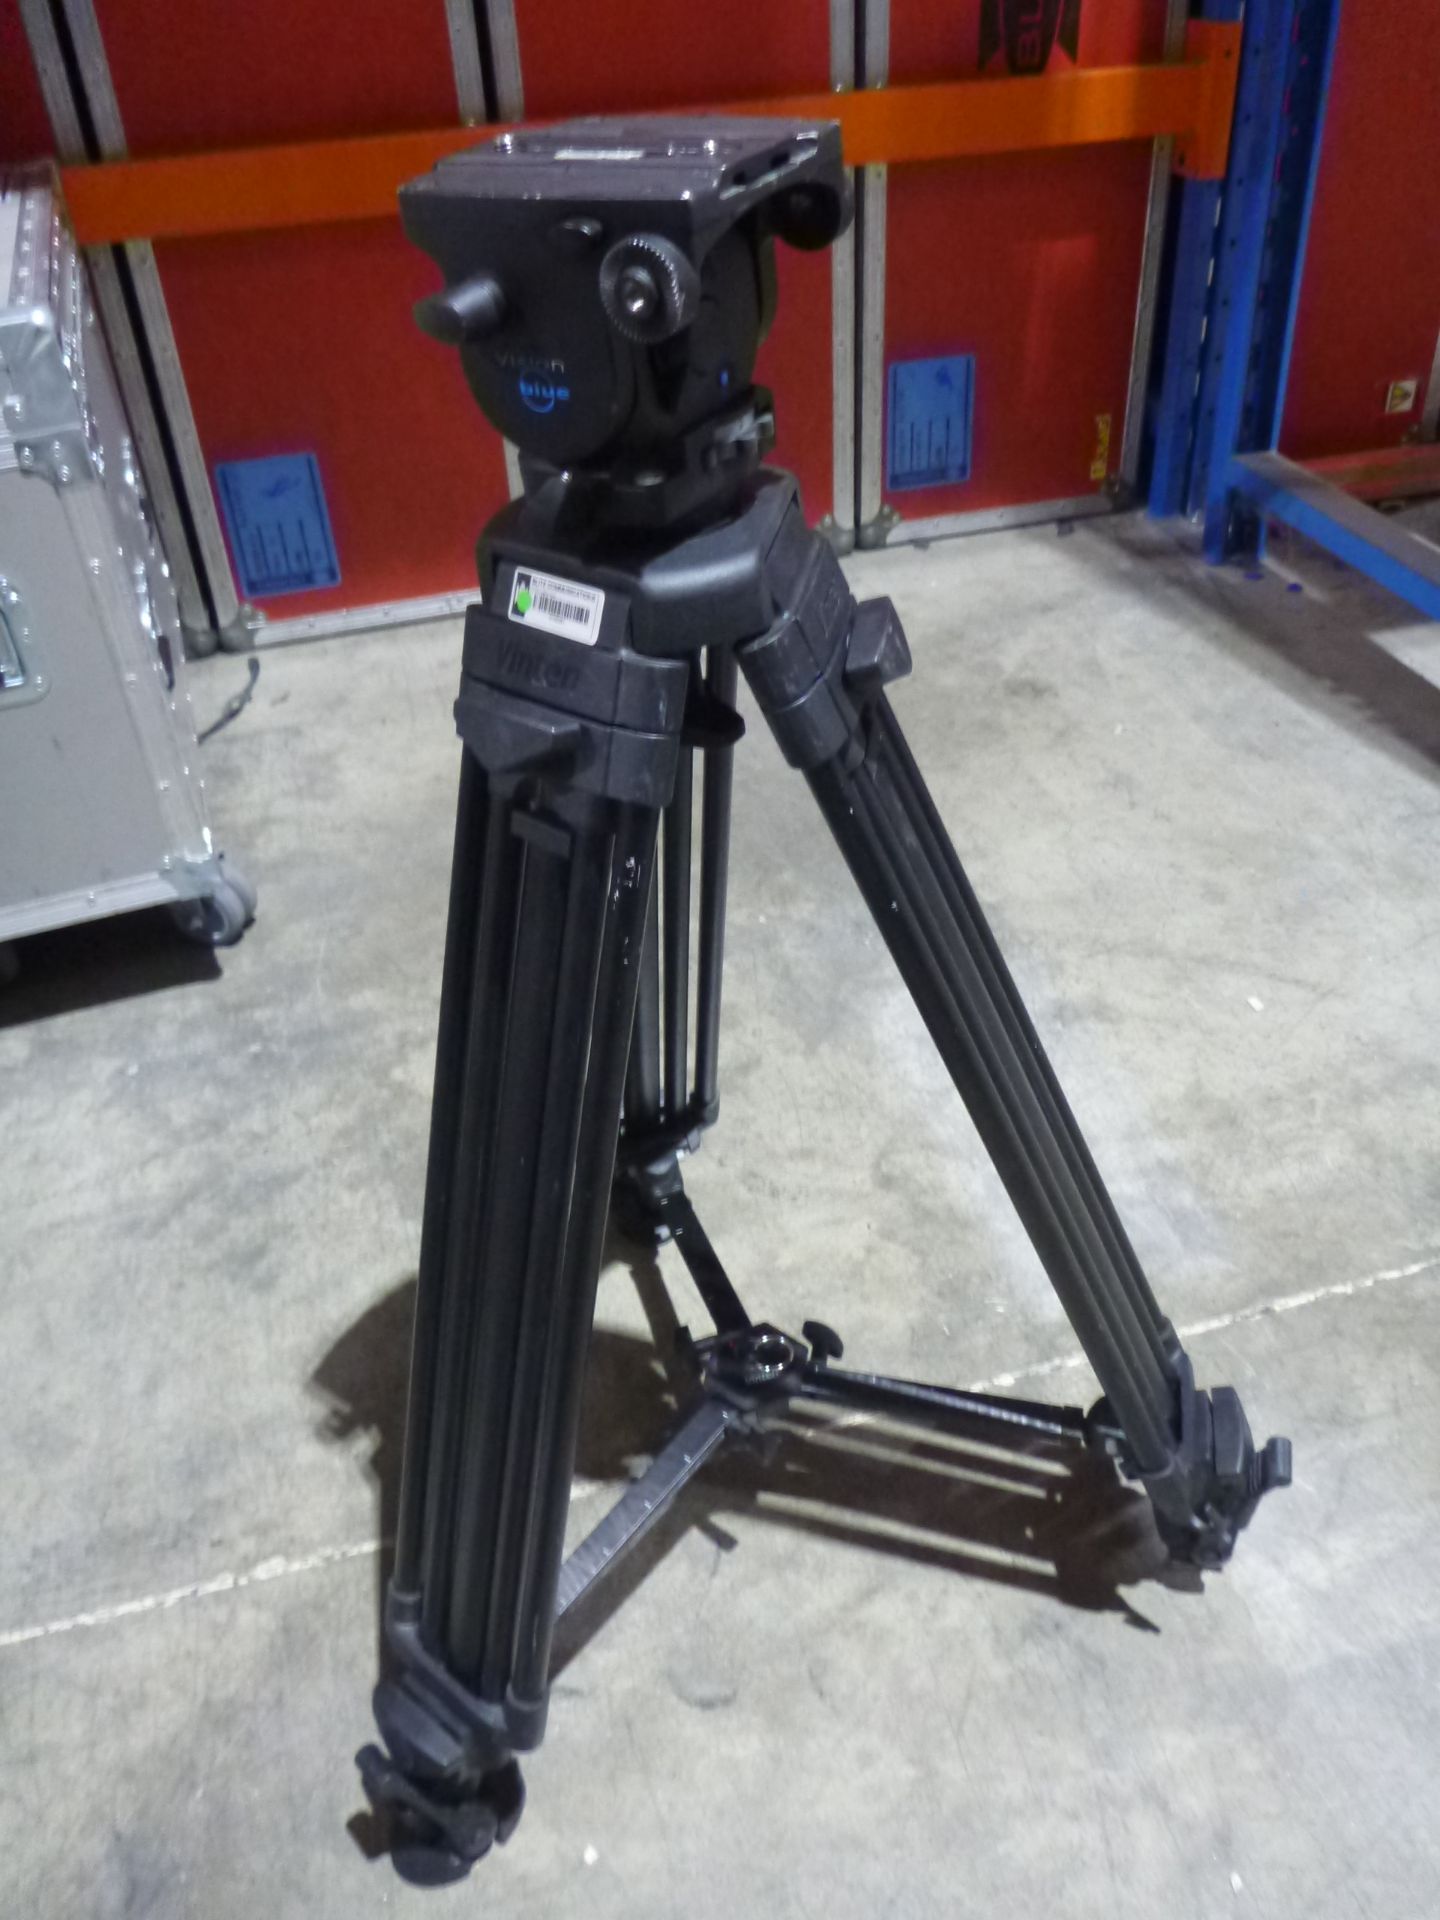 Vinton Camera Tripod, Model Vision Blue, In carry and flight case